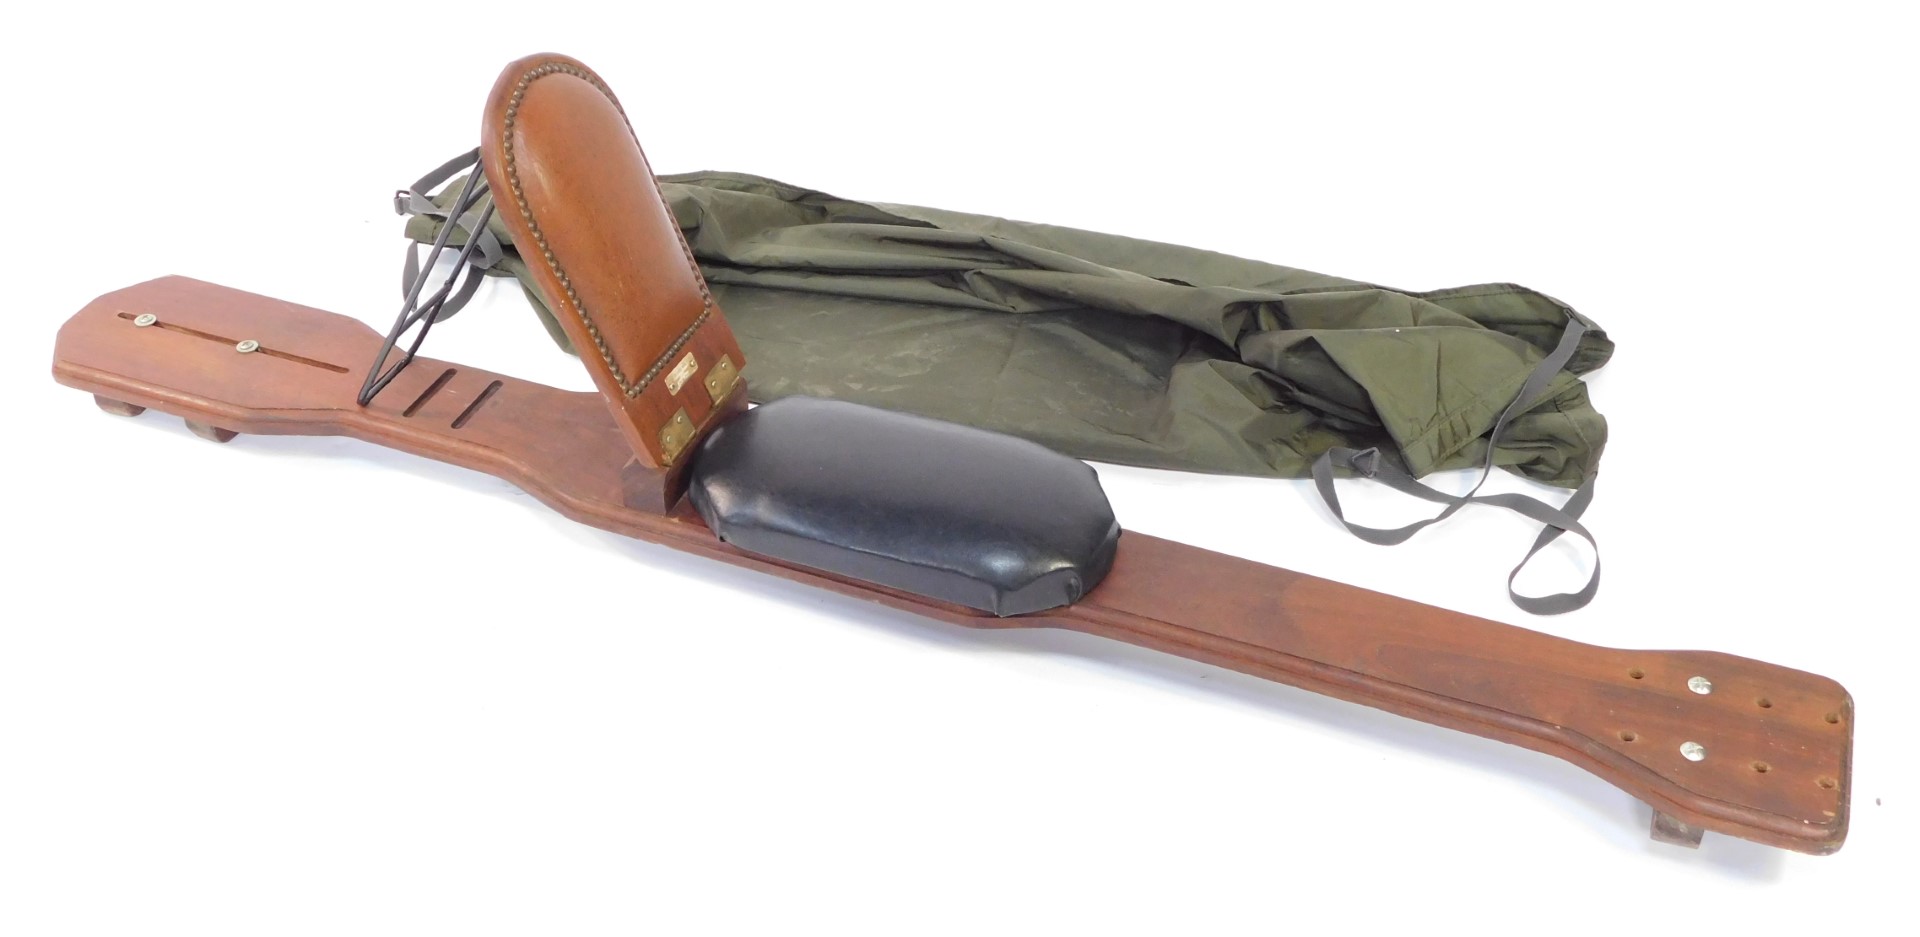 A boat board seat, with adjustable back support, built by Barry J Pond., 177cm wide, padded seat, t